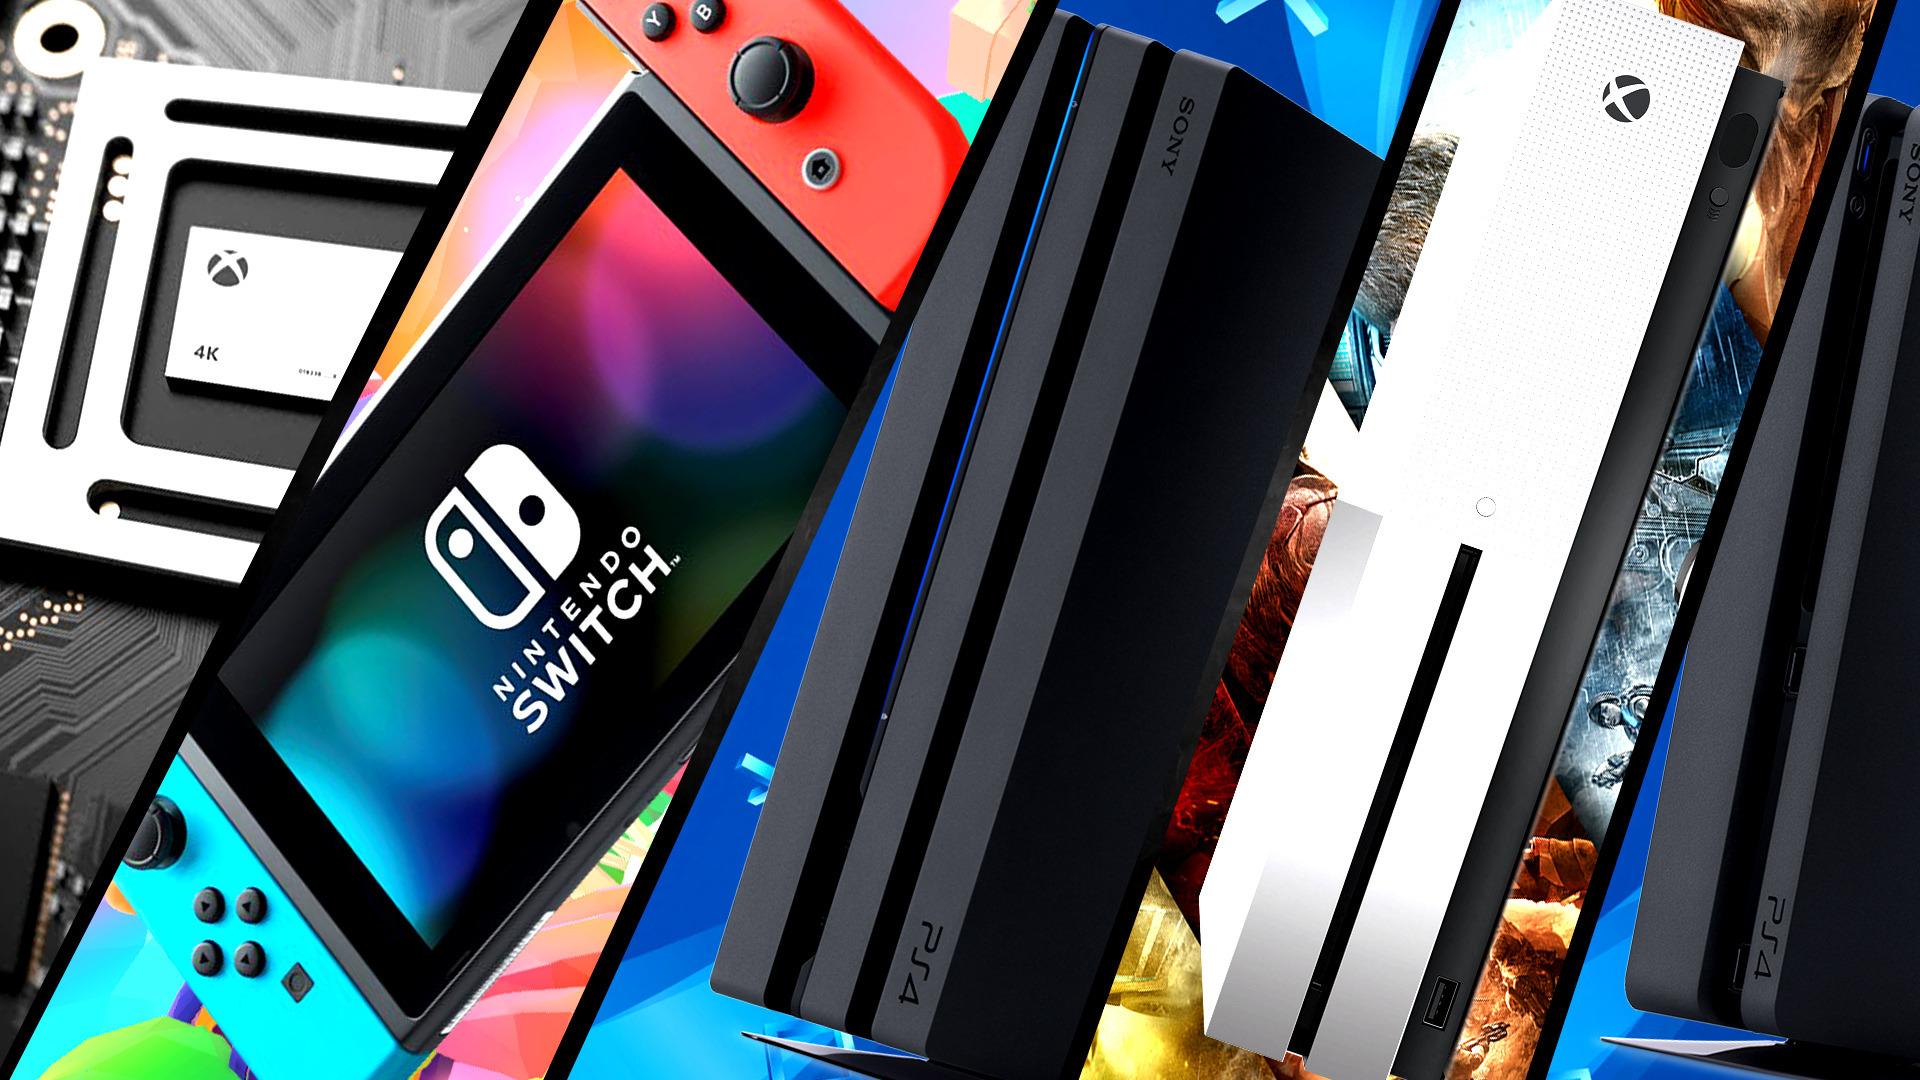 Pachter: ”Every Console Generation Going Forward Will Be